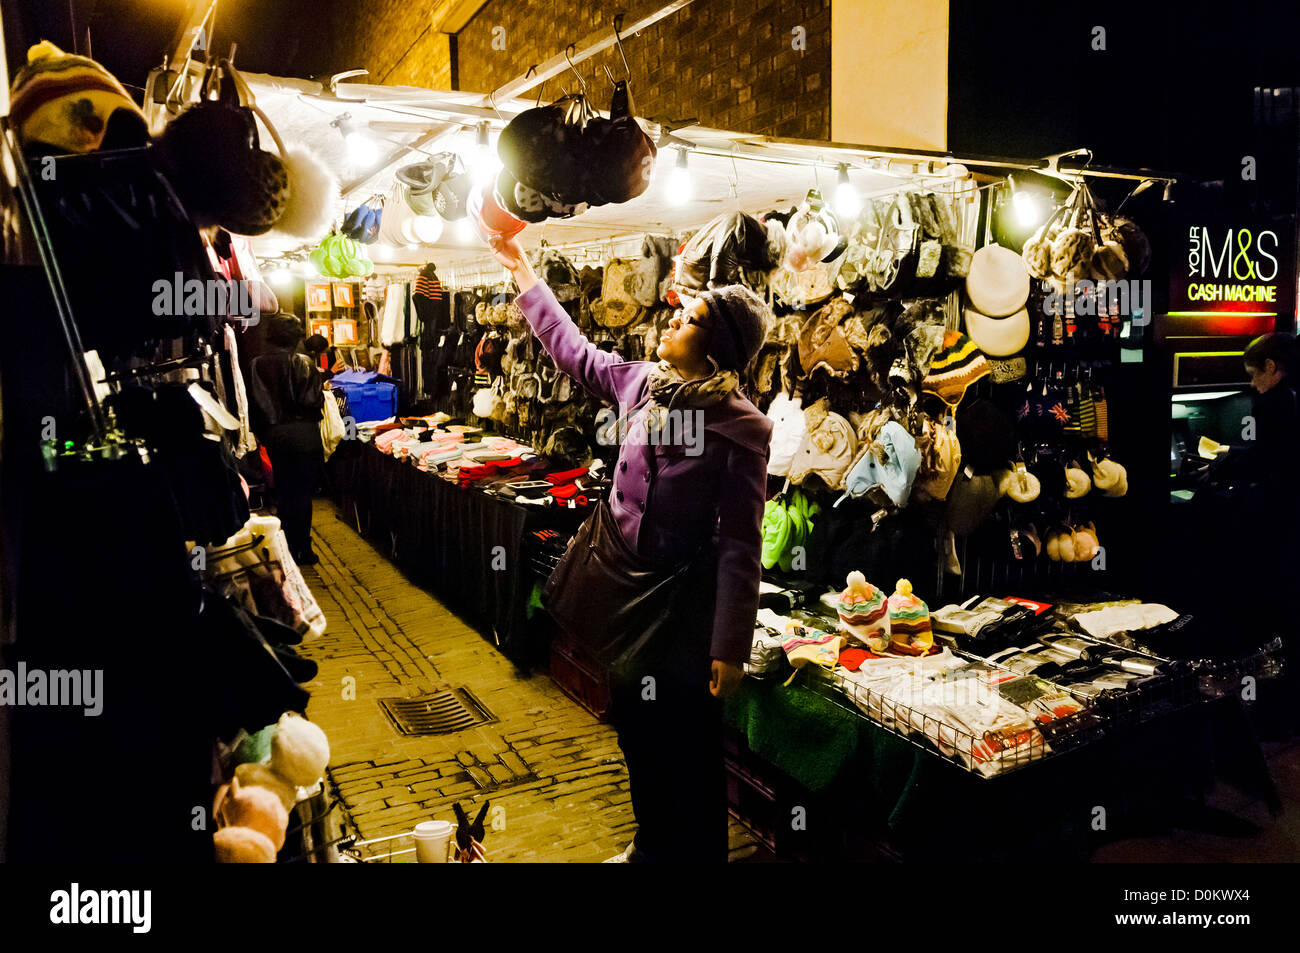 Late evening at a market stall in Camden. Stock Photo